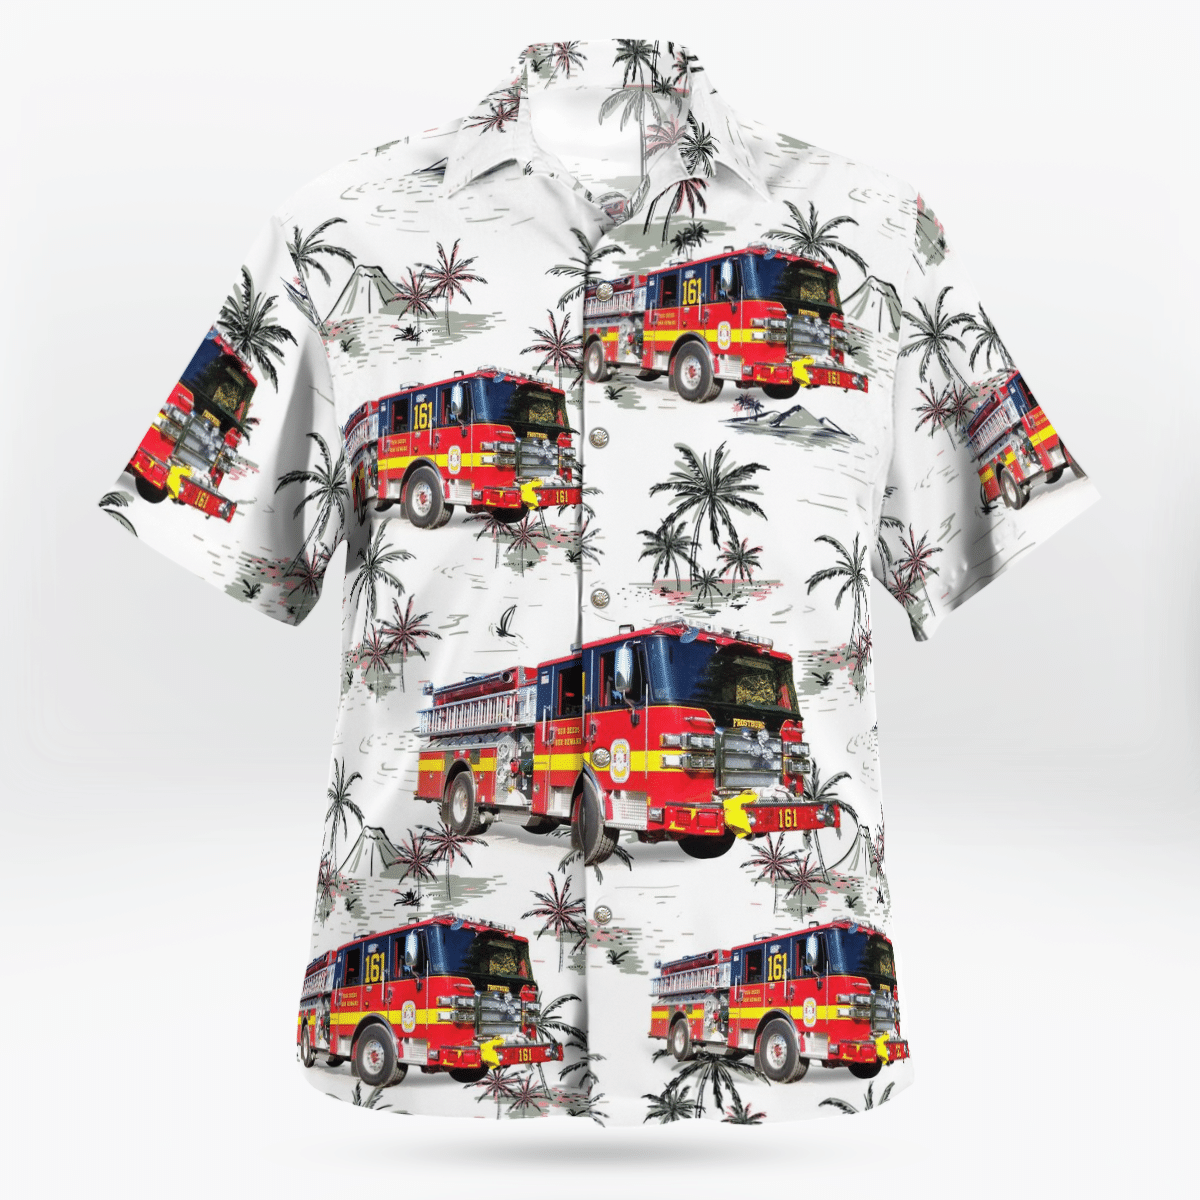 Hawaiian shirts never go out of style 267